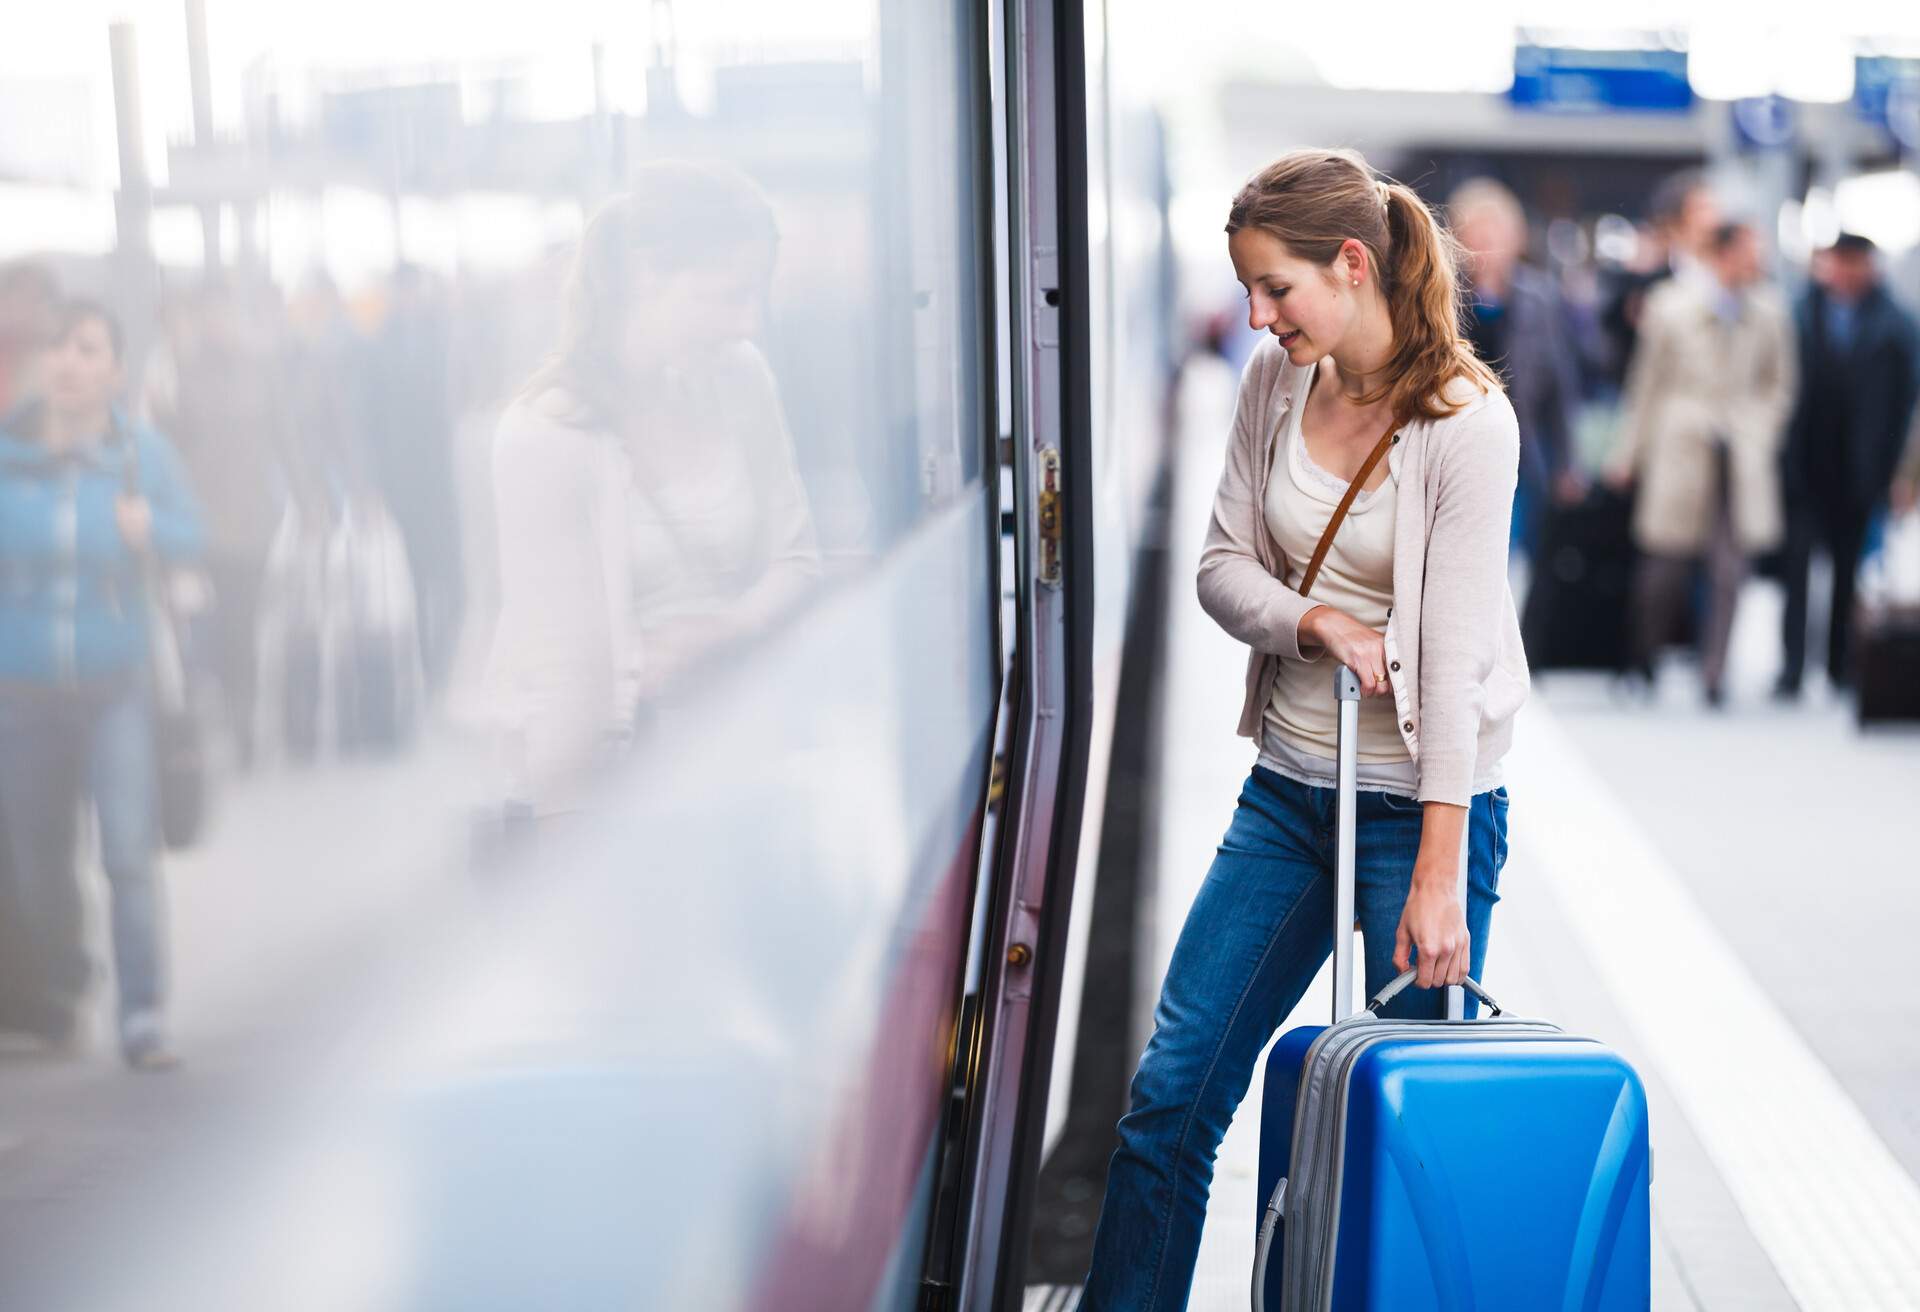 Pretty young woman at a train station; Shutterstock ID 115054240